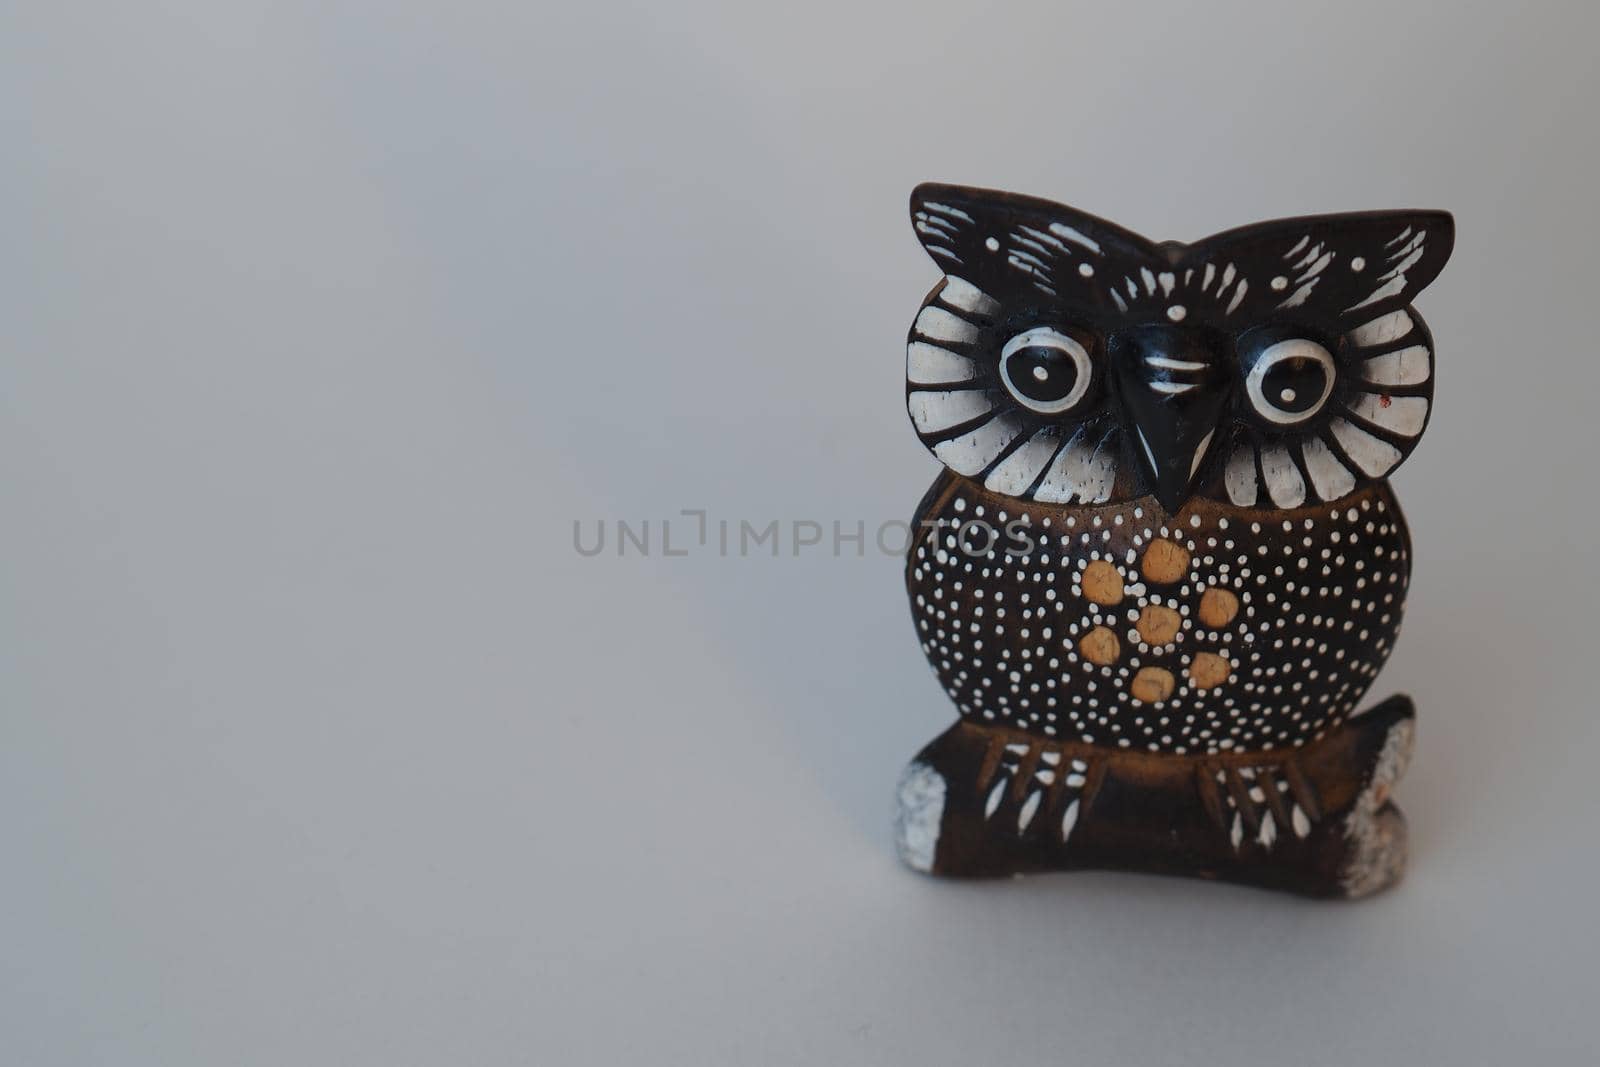 Birds and animals. Statuette of an owl. Toys made of wood. High quality photo